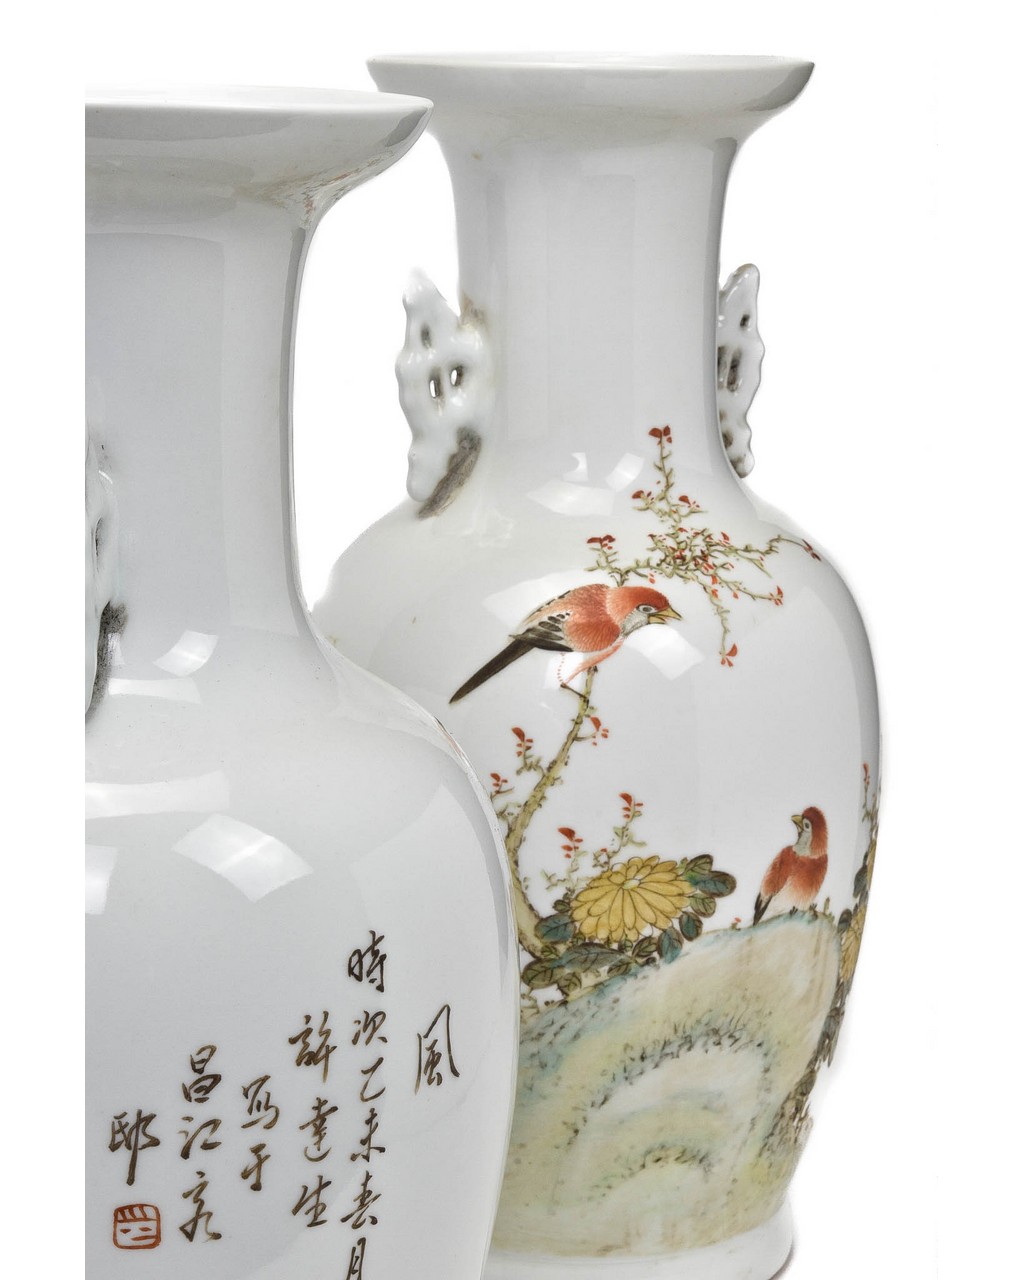 PAIR OF LARGE CHINESE PORCELAIN VASES - Image 9 of 9